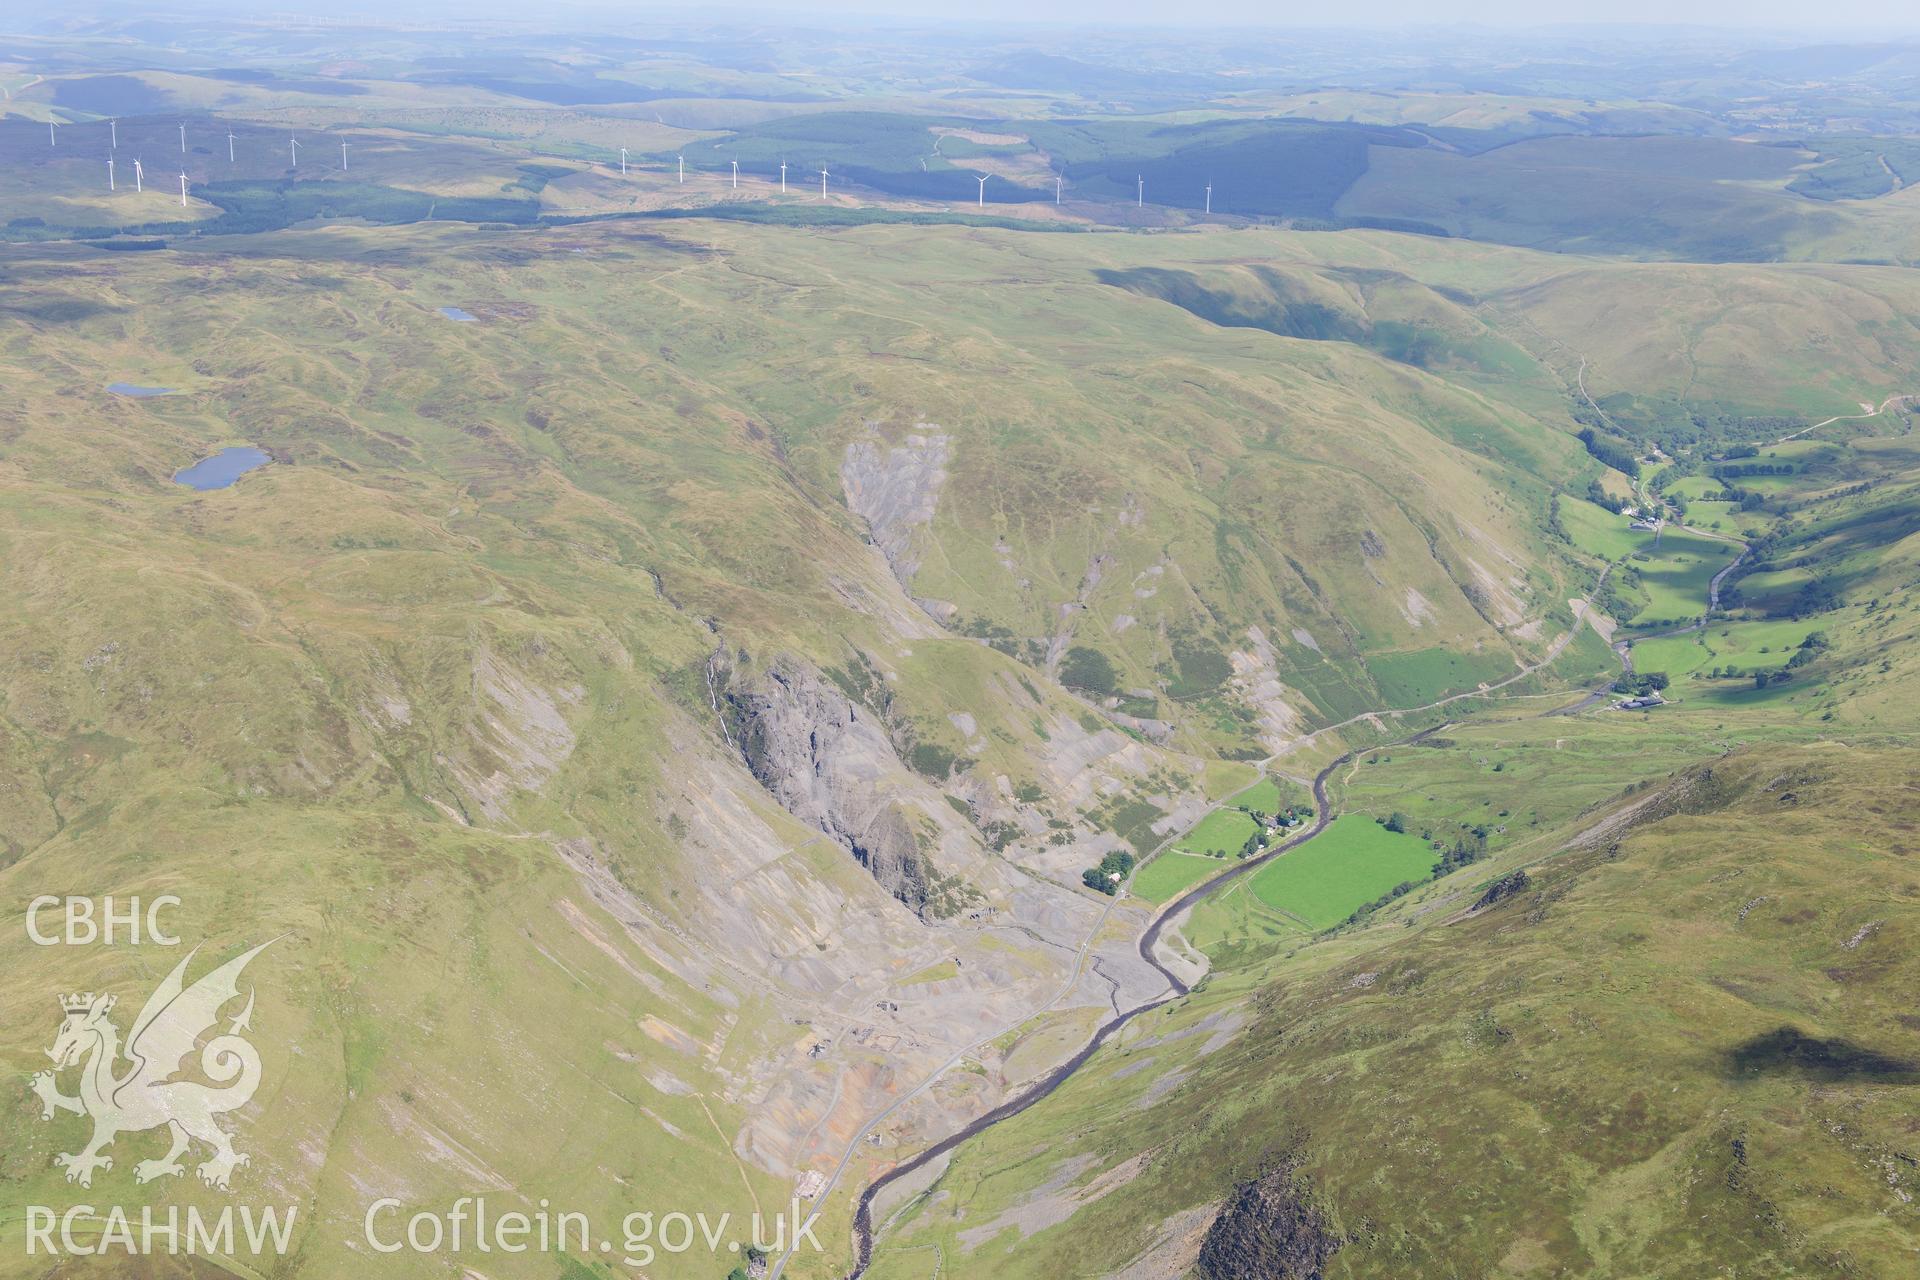 RCAHMW colour oblique photograph of South Cwmystwyth lead mine, looking north-east towards Cefn Croes Wind Farm. Taken by Toby Driver on 10/08/2012.